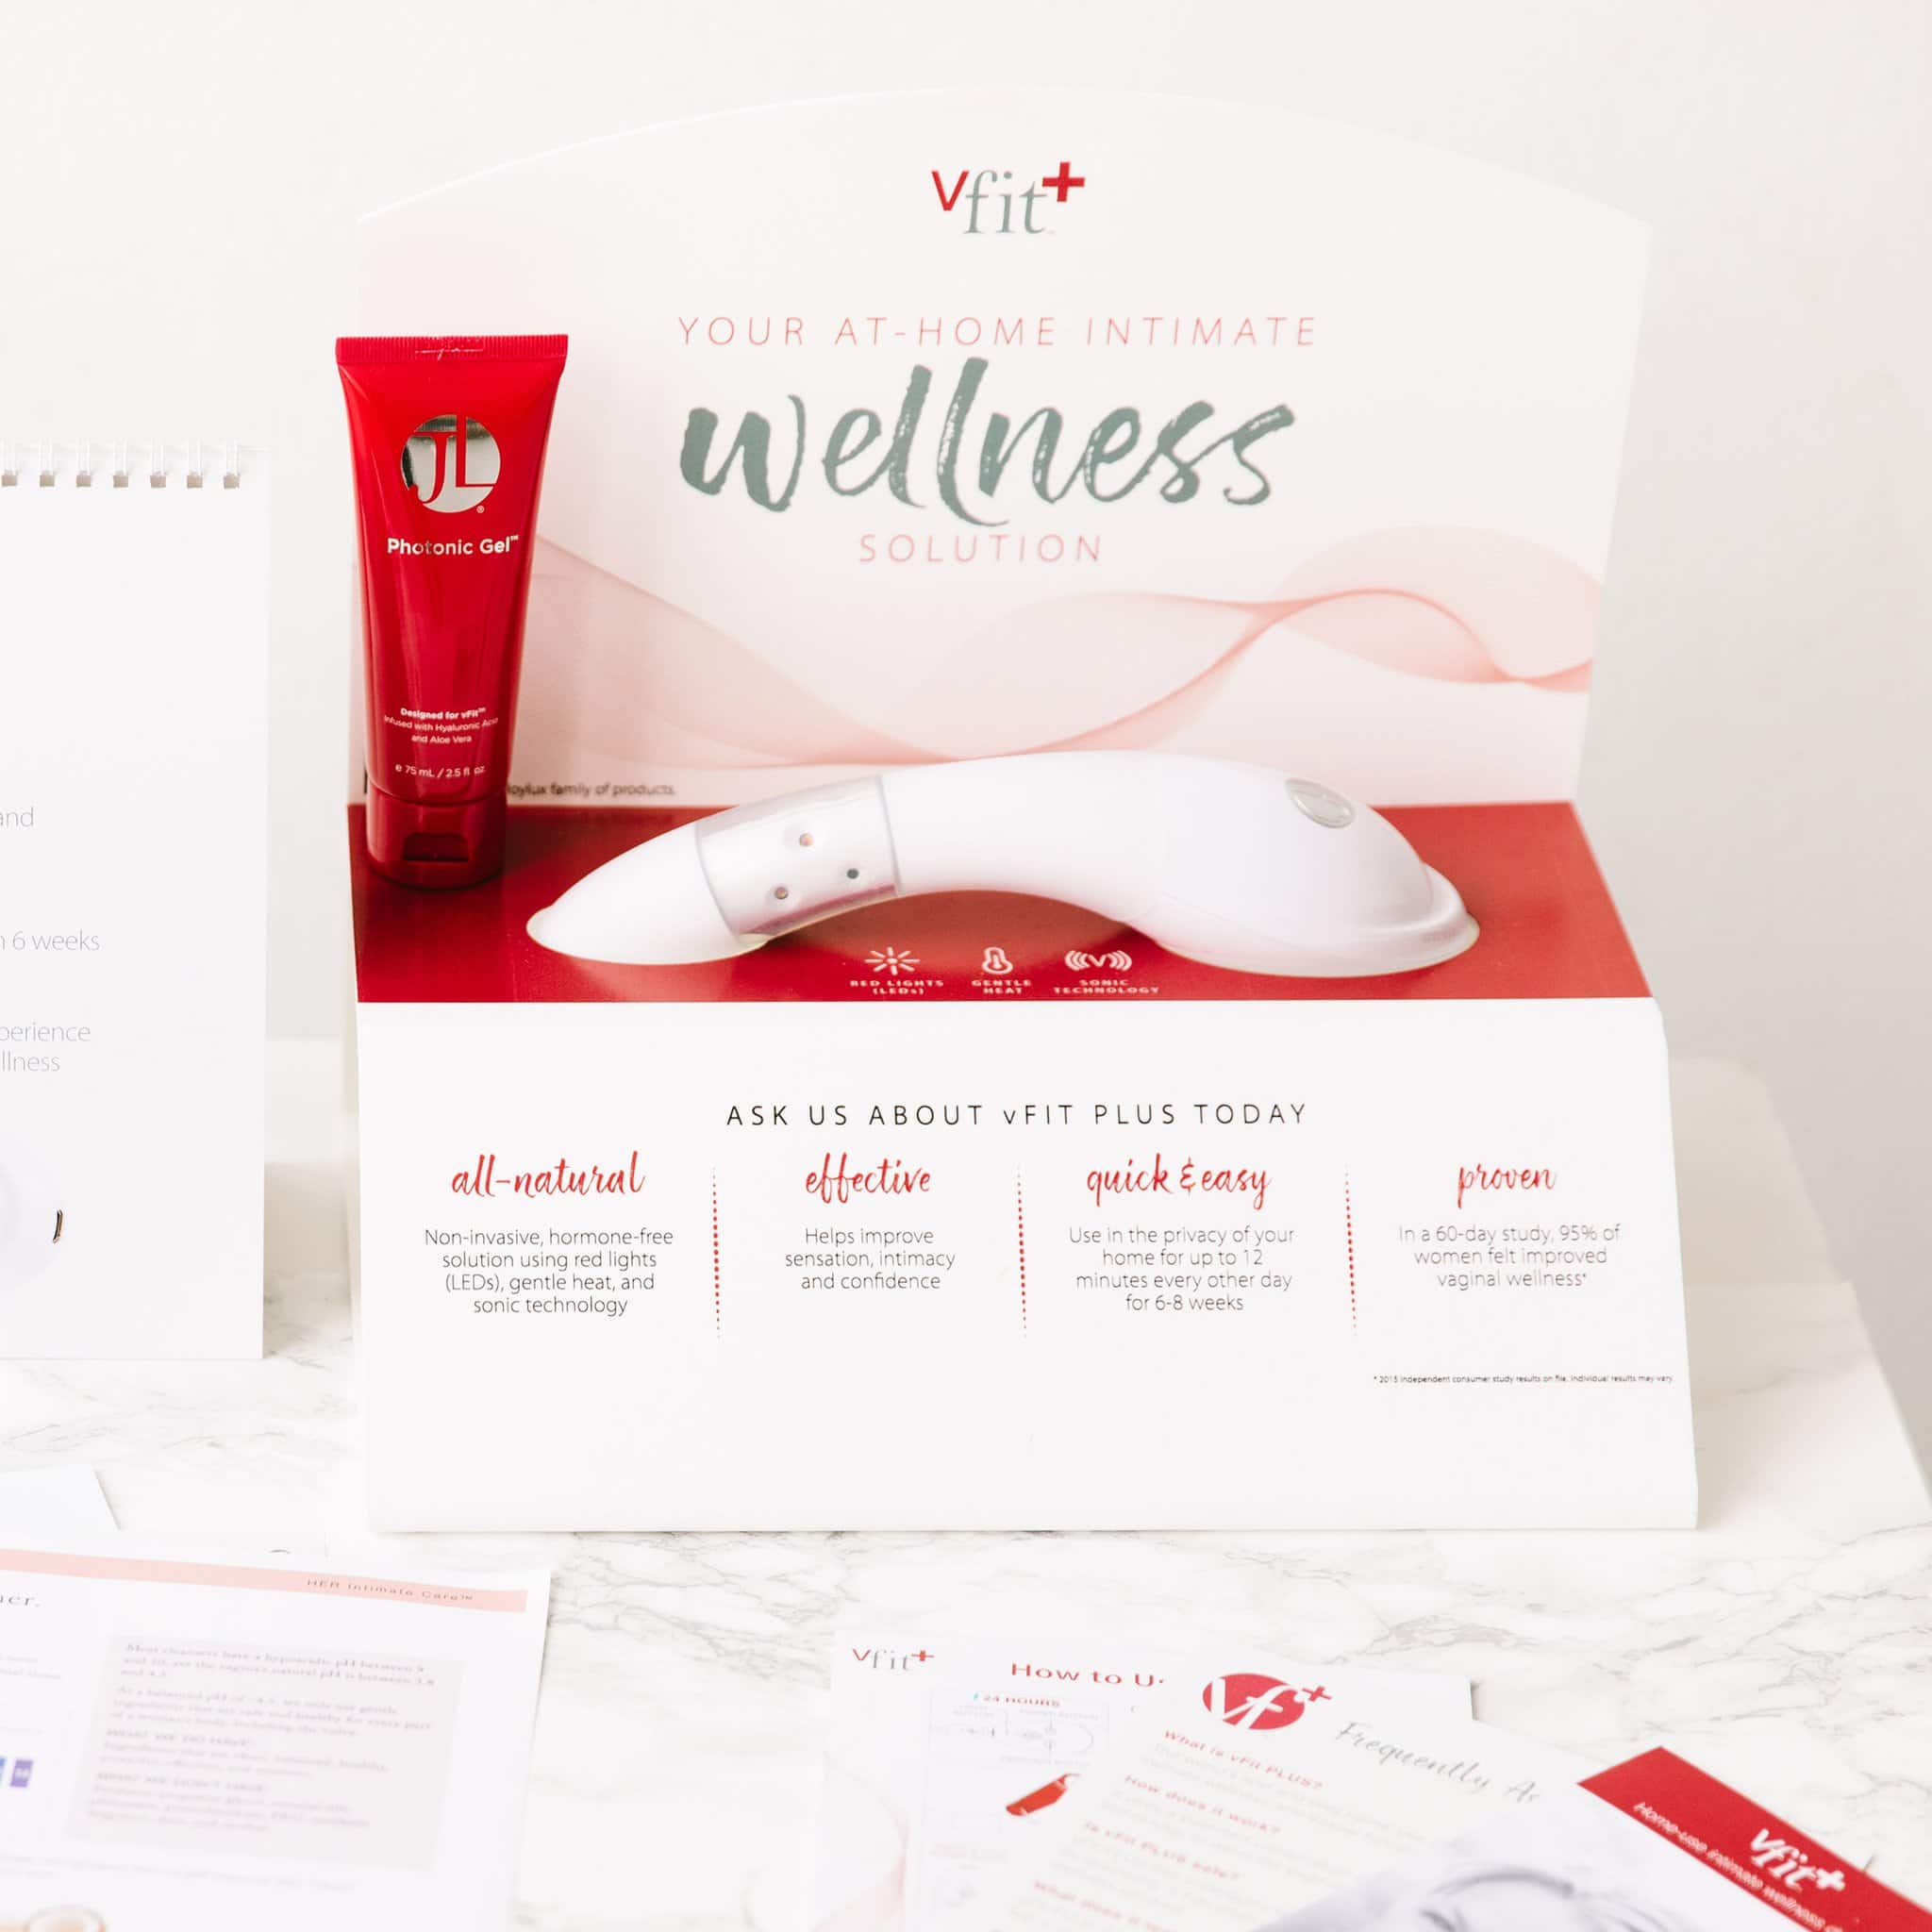 Joylux’s vFit PLUS product for intimate wellness on display with a red bottle of the Photonic Gel alongside it.